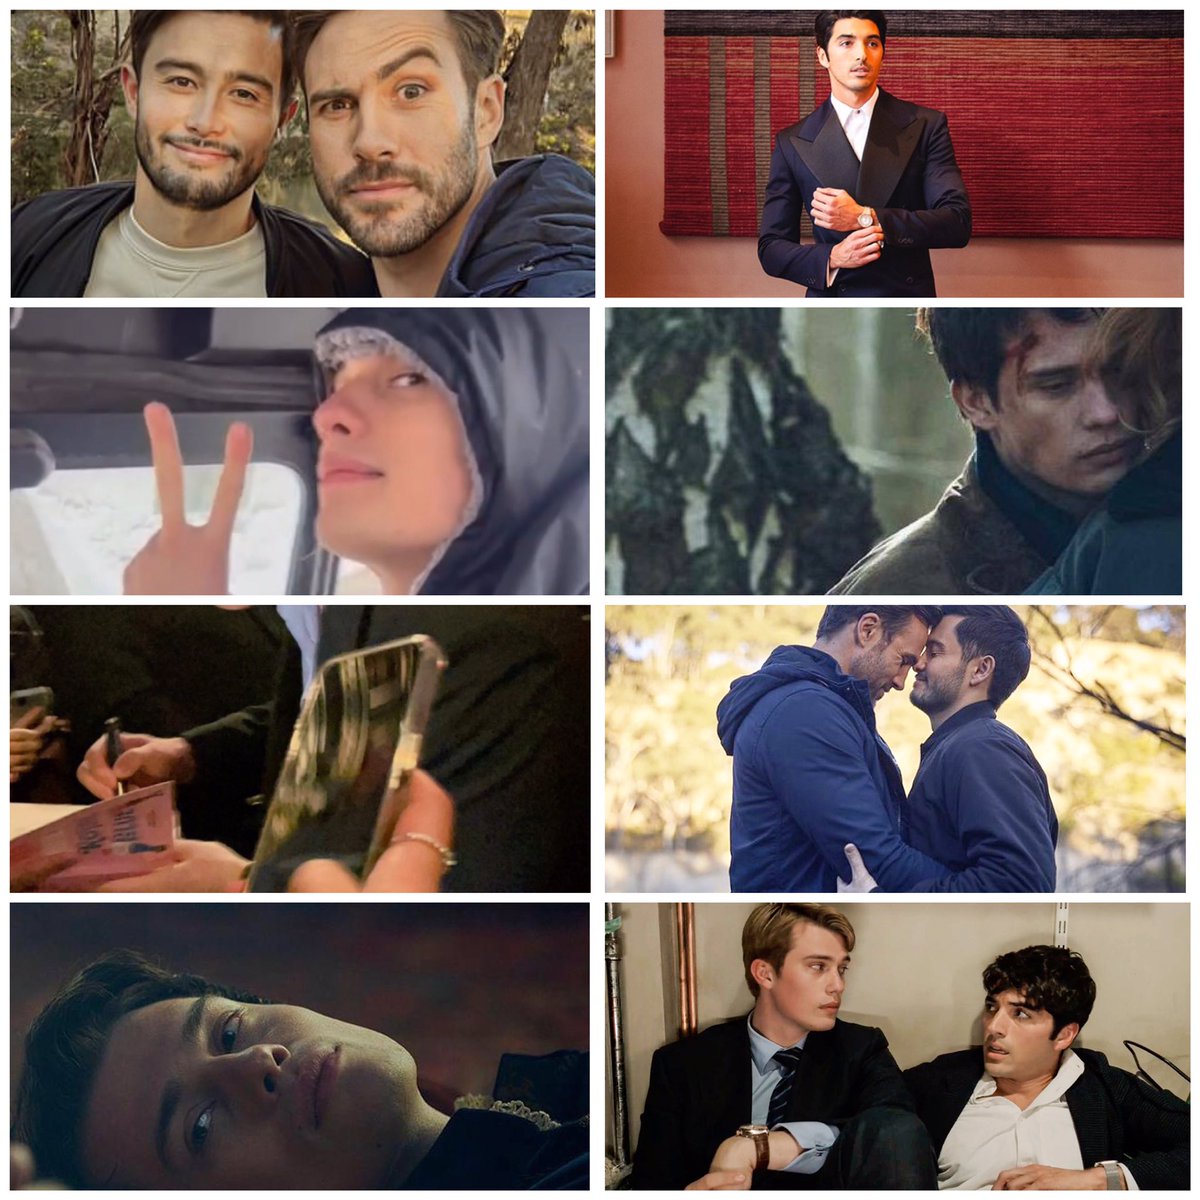 Eight of my favourite pictures of the last week or so, all brought me comfort and joy in some way ❤️ #daaron #MattWilson #TakayaHonda  #neighbours #TaylorZakharPerez #NicholasGalitzine #FIRSTPRINCE  #RWRBMovie  #nicksigningthelittlepinkbook